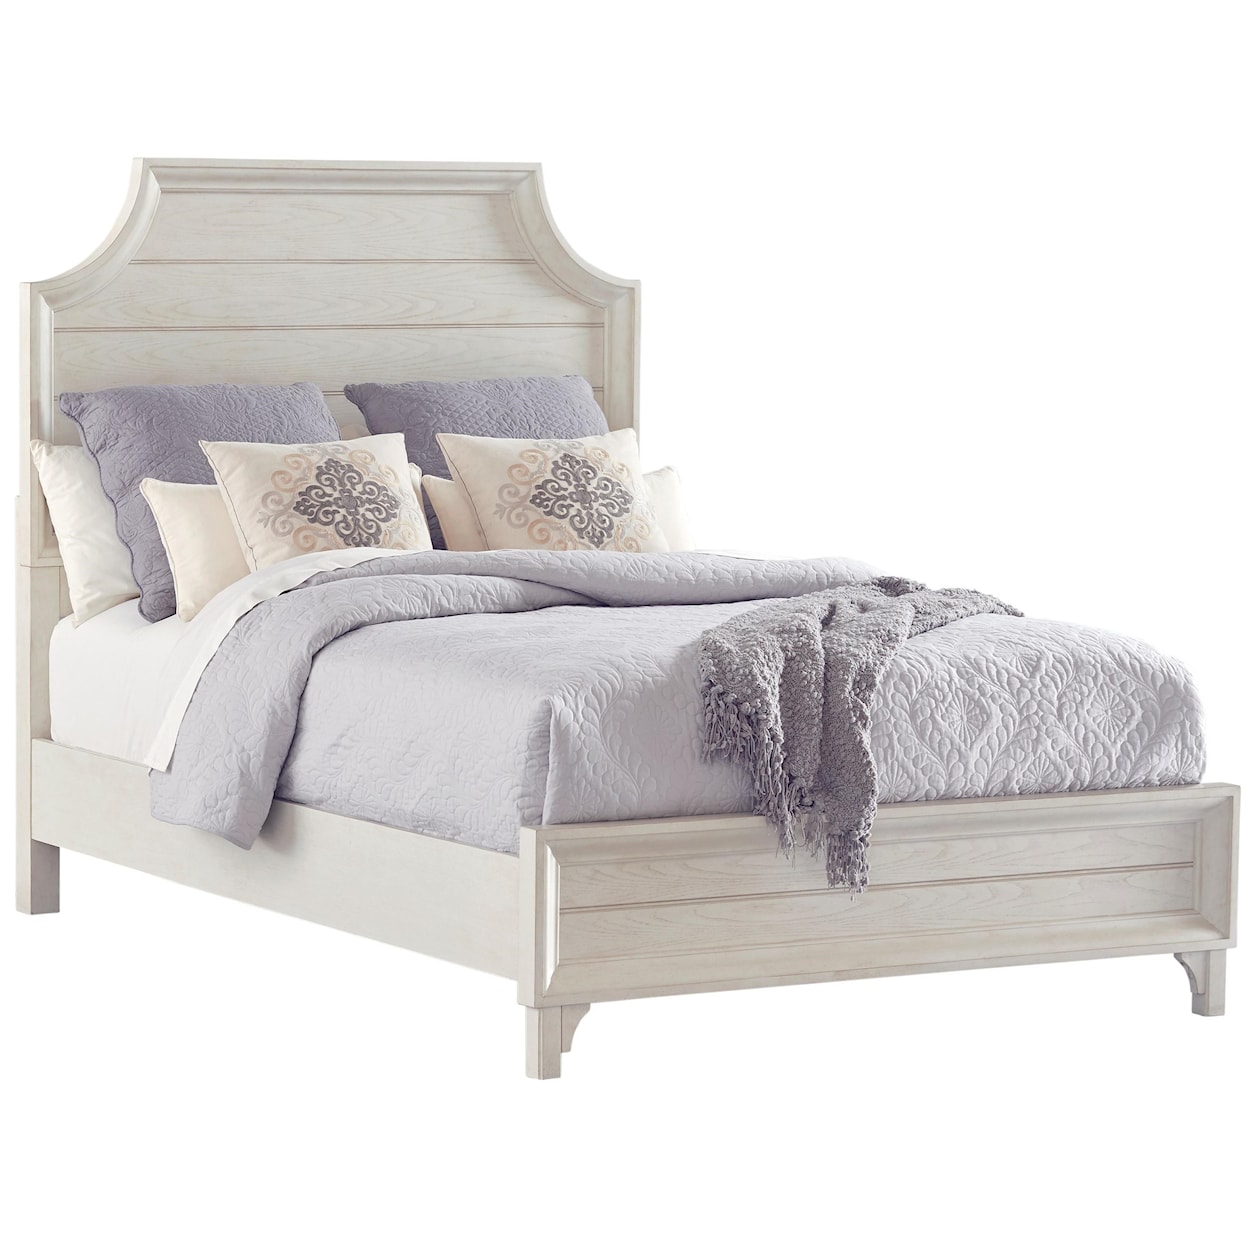 Avalon Furniture Mystic Cay King Bed